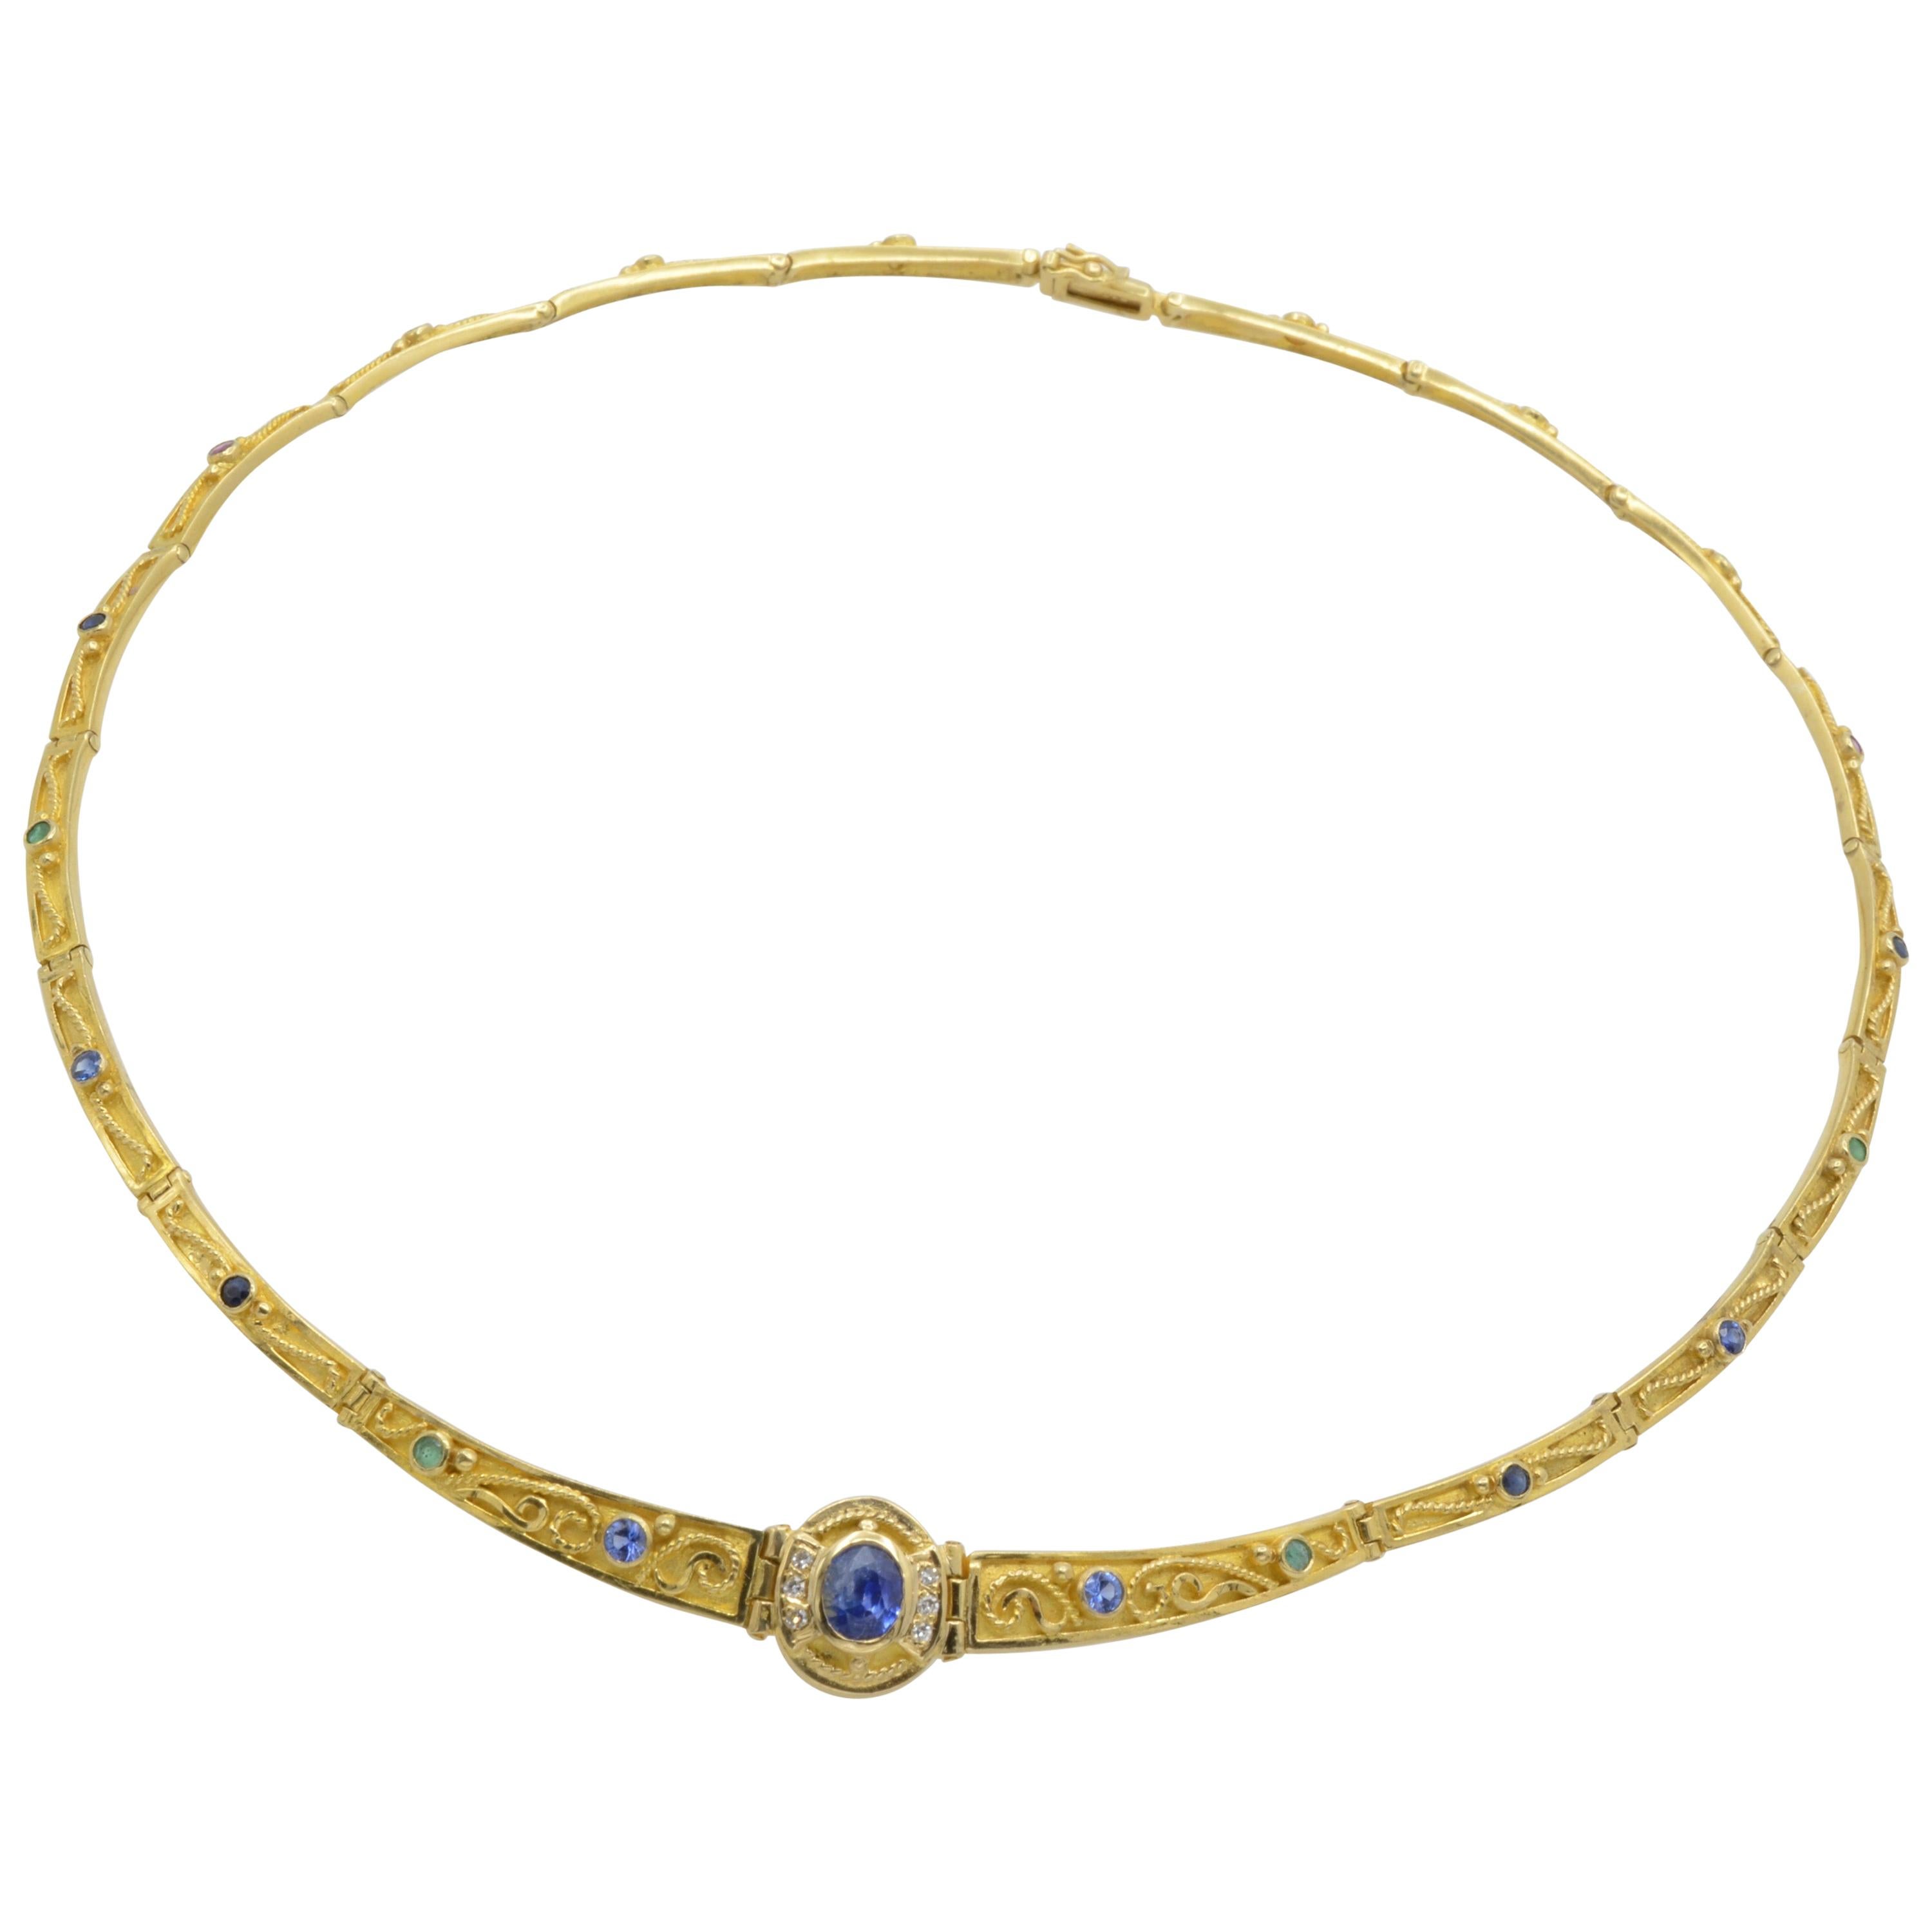 Gold Greek Collar 18K and Sapphires Necklace Articulate Links